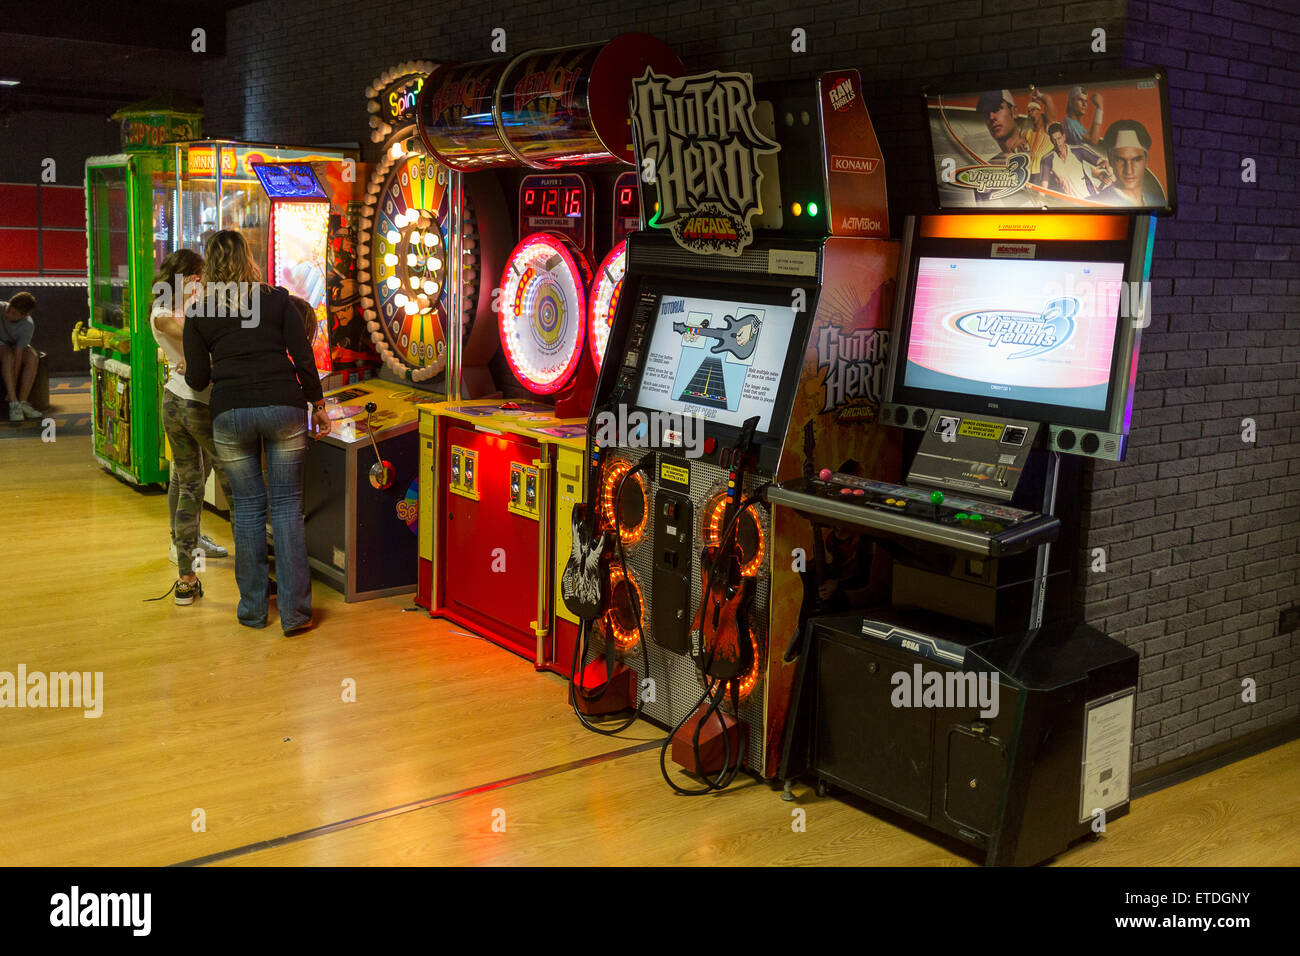 Rome, Italy, 05/12/2015 - Videogame room in the Brunswick leisure centre Stock Photo